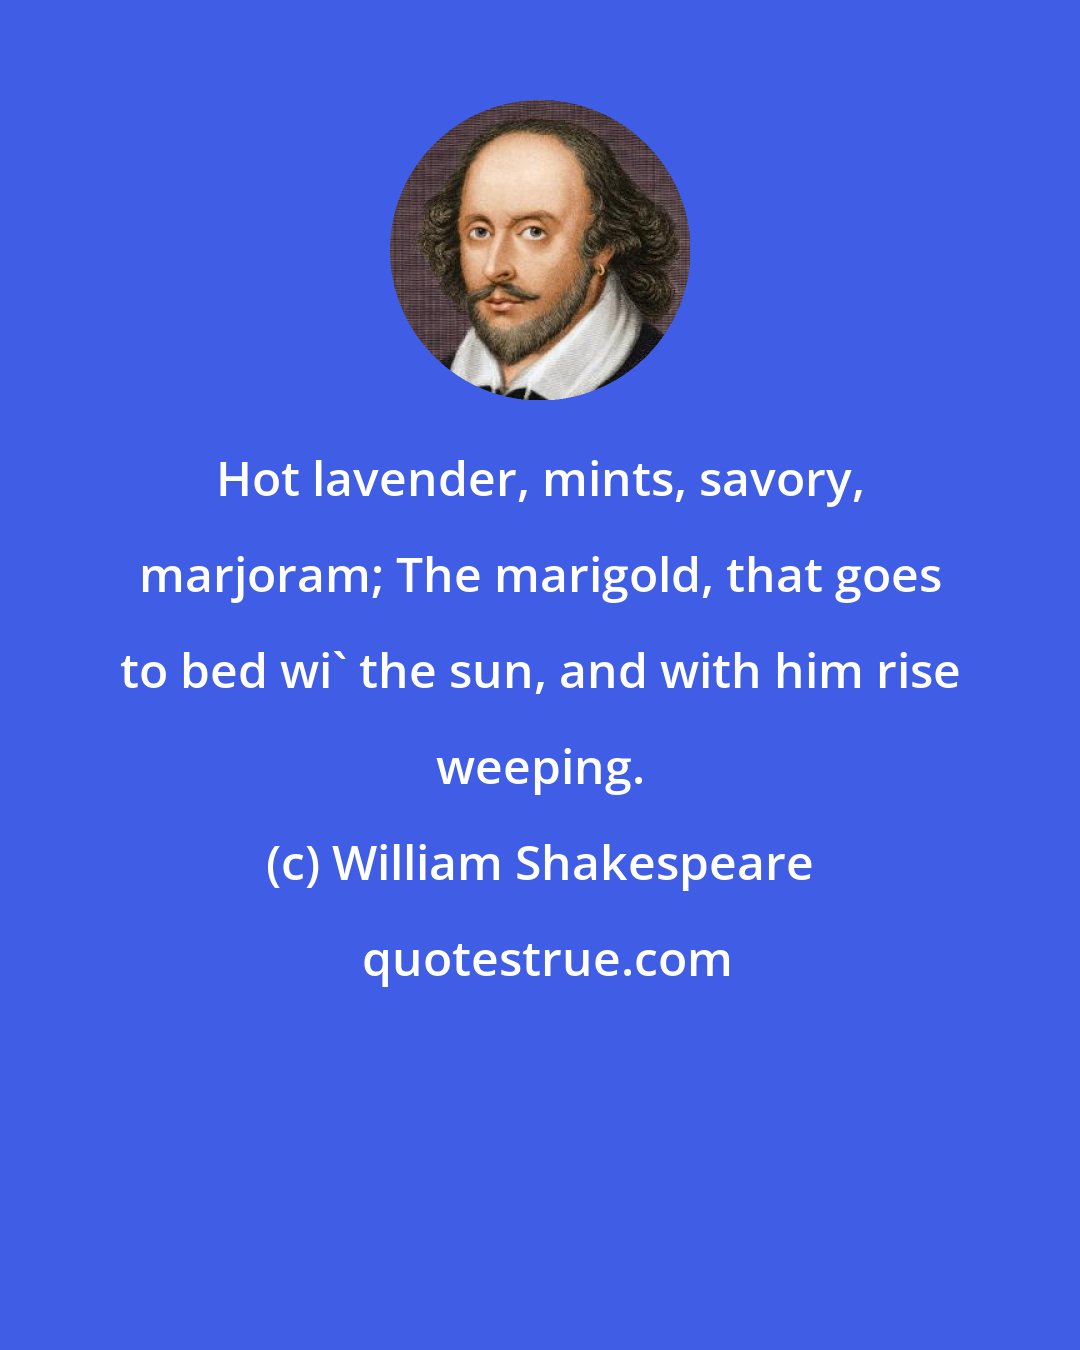 William Shakespeare: Hot lavender, mints, savory, marjoram; The marigold, that goes to bed wi' the sun, and with him rise weeping.